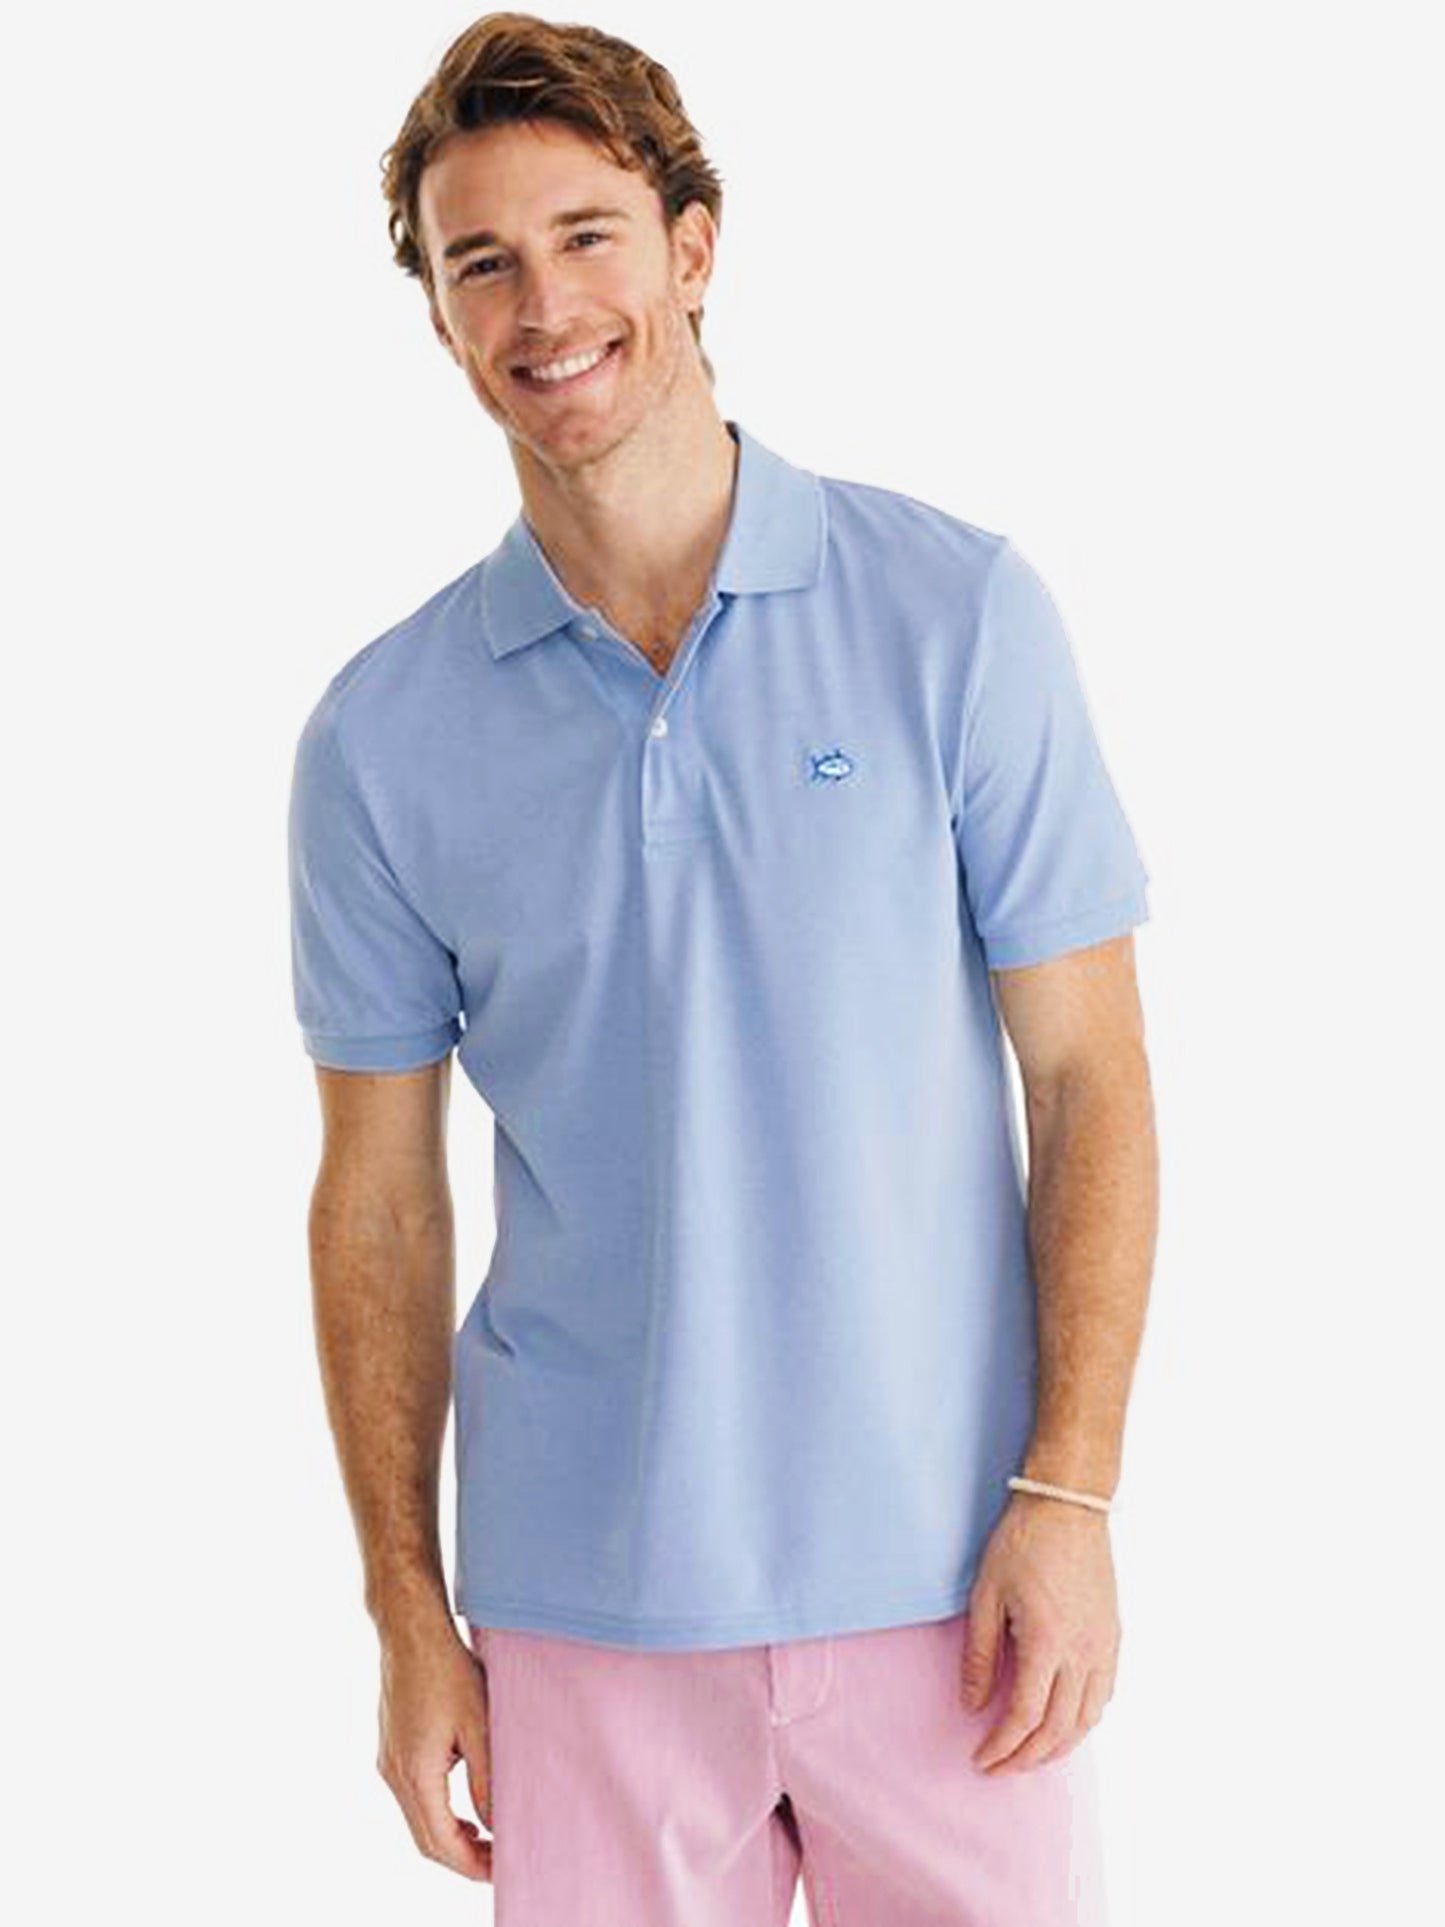 Southern Tide Men's Short Sleeve Jack Heather Performance Pique Polo